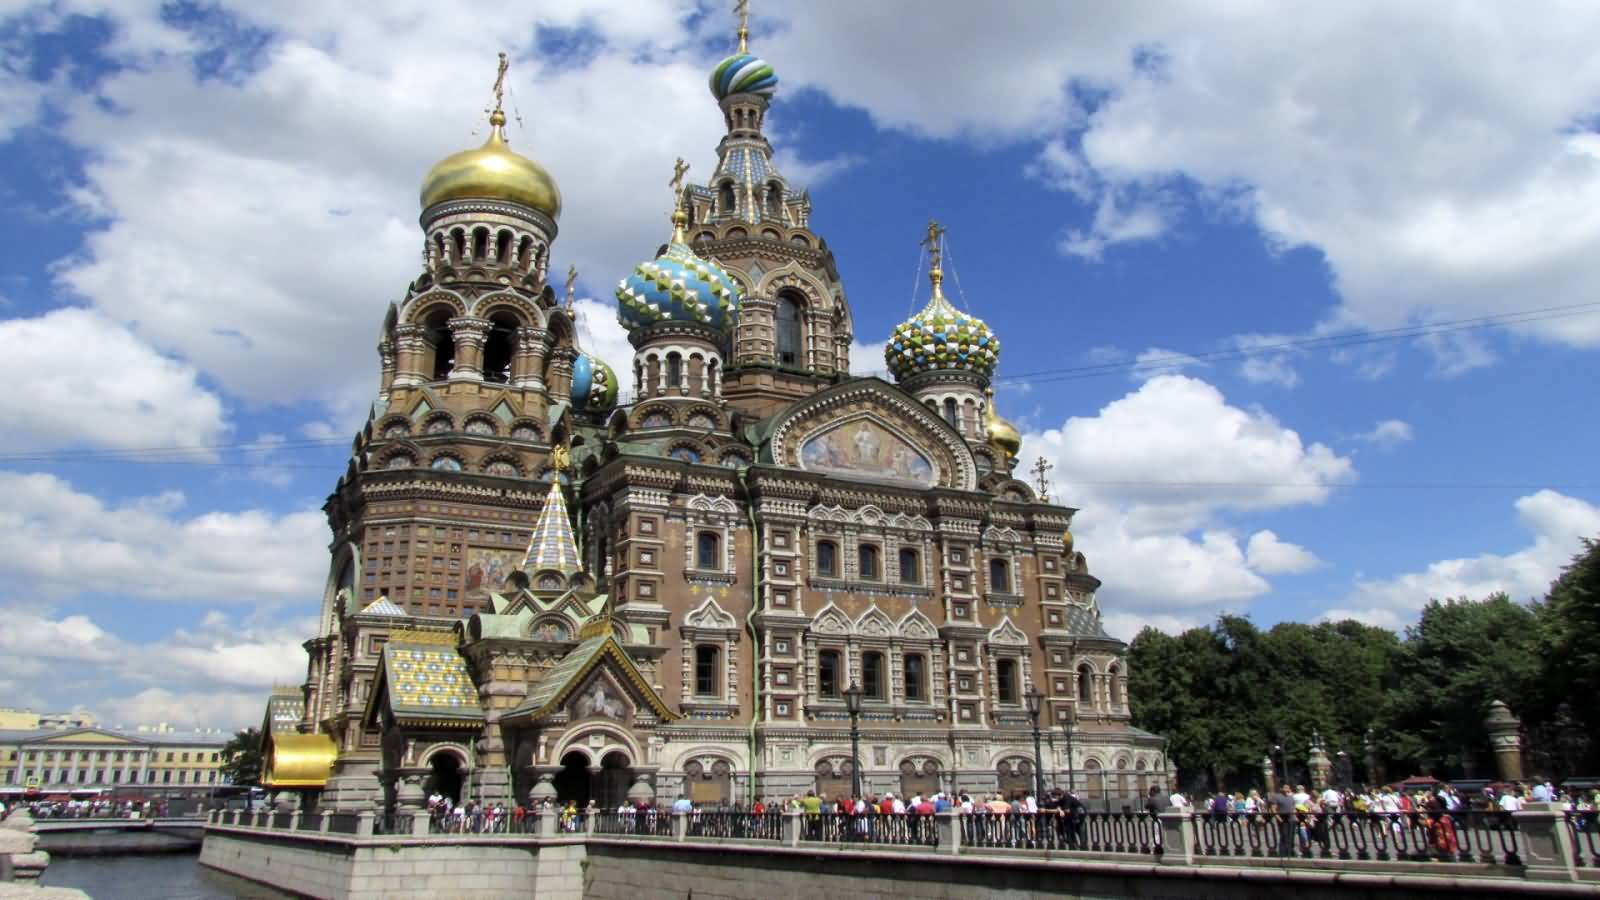 Exterior Image Of The Church Of The Savior On Blood